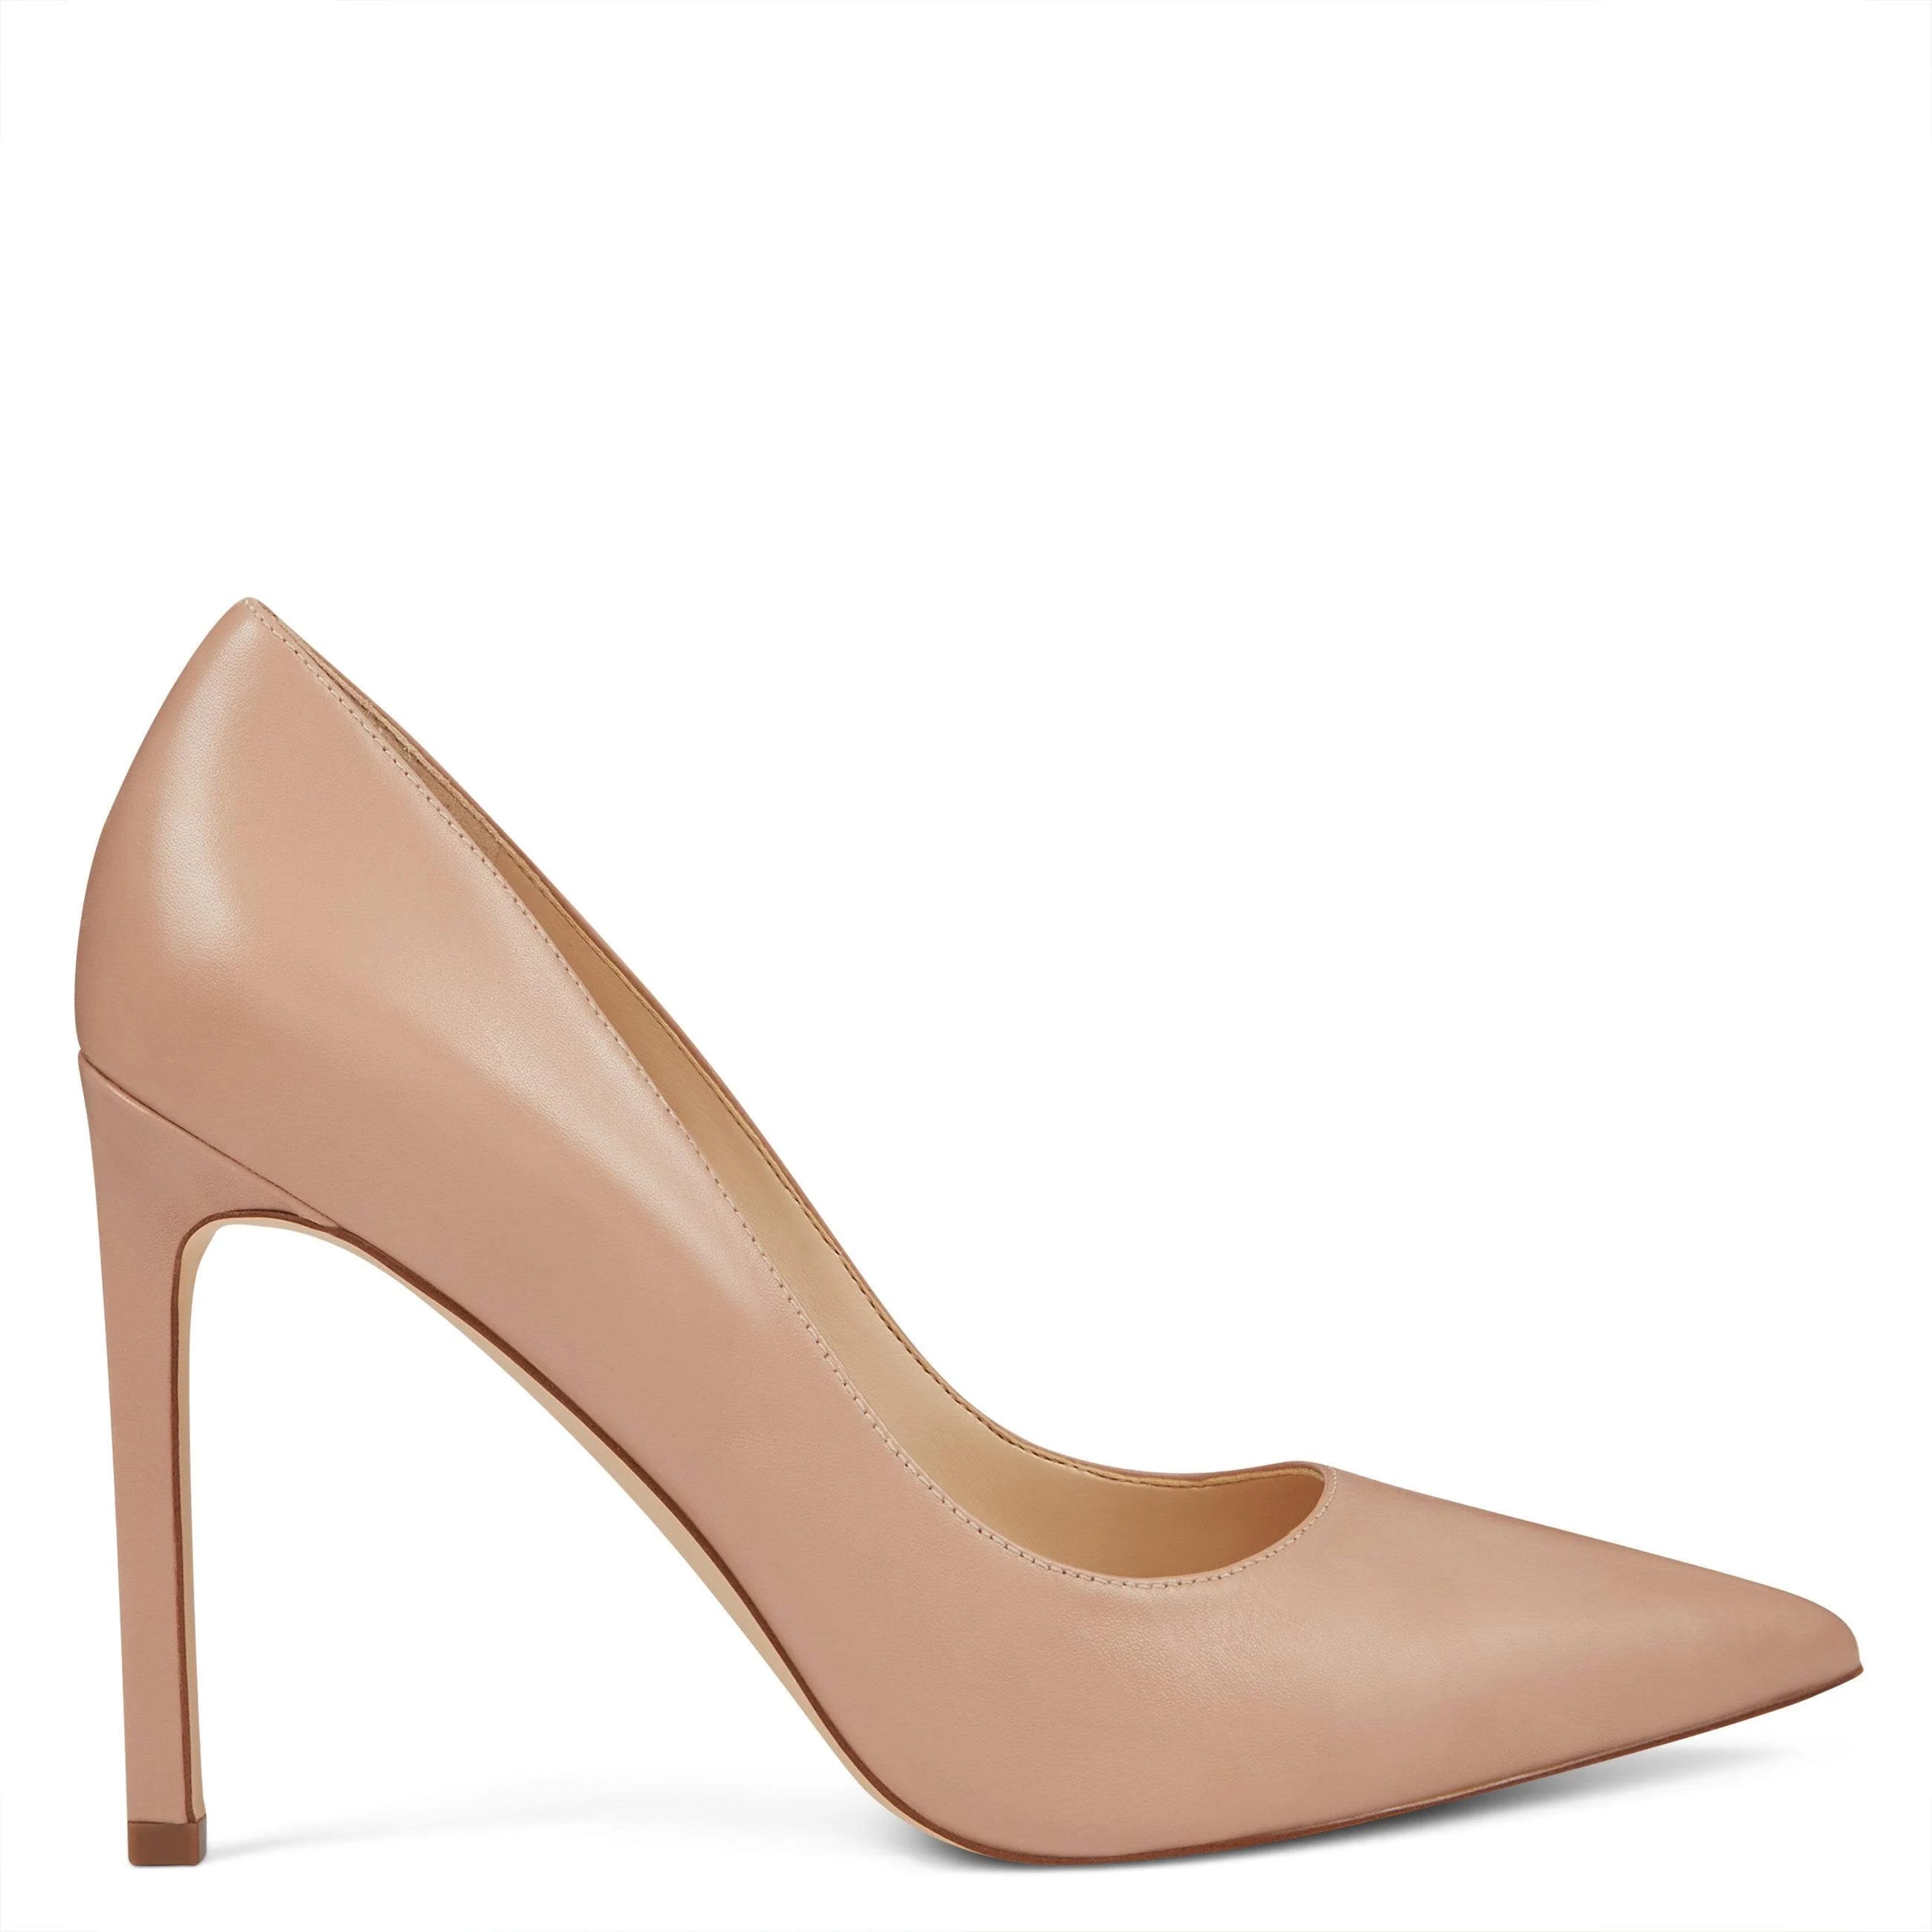 Stylish Pointed-Toe Leather Pump for Women | Image